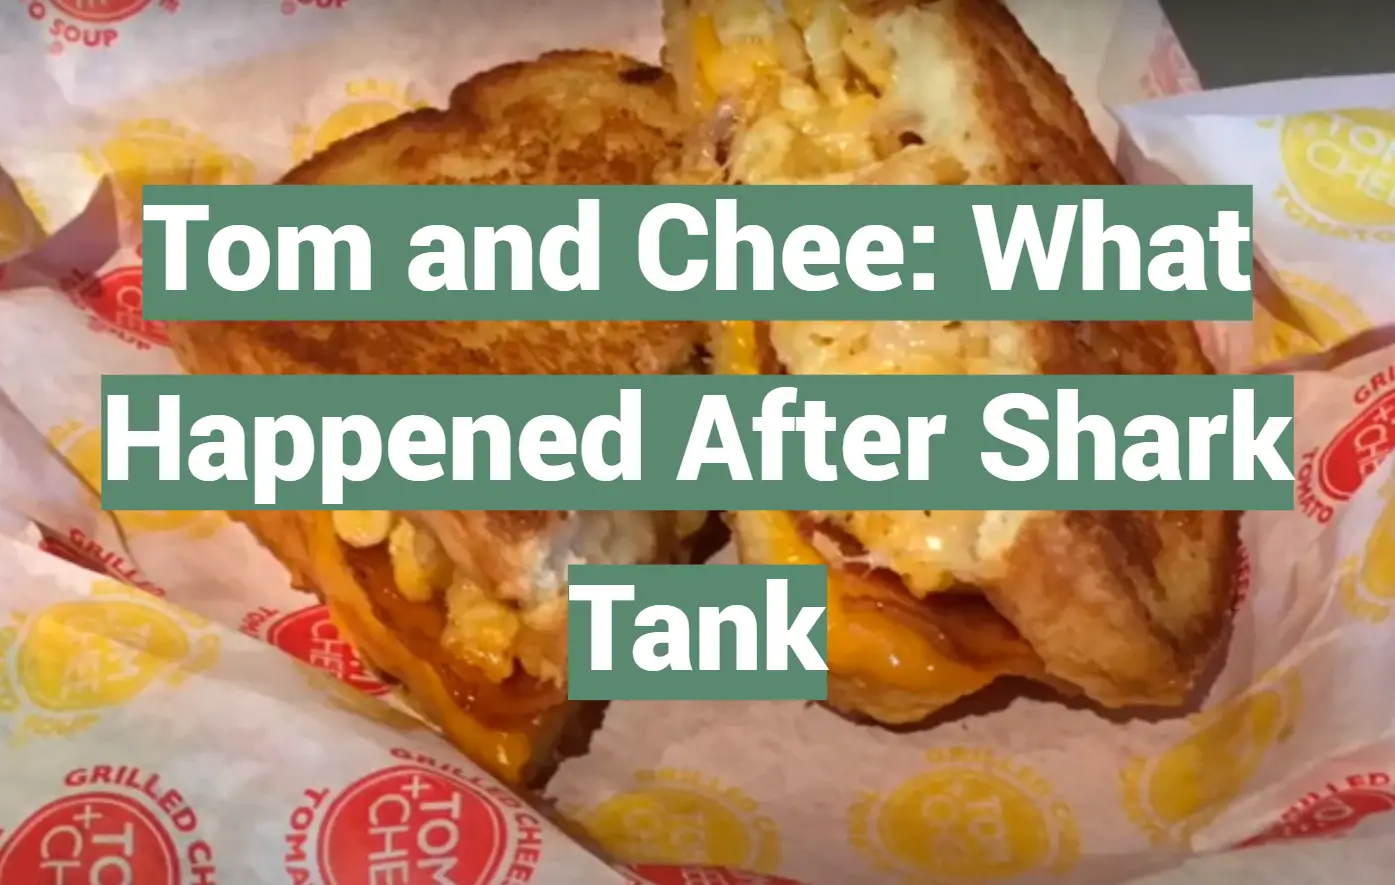 Tom and Chee: What Happened After Shark Tank